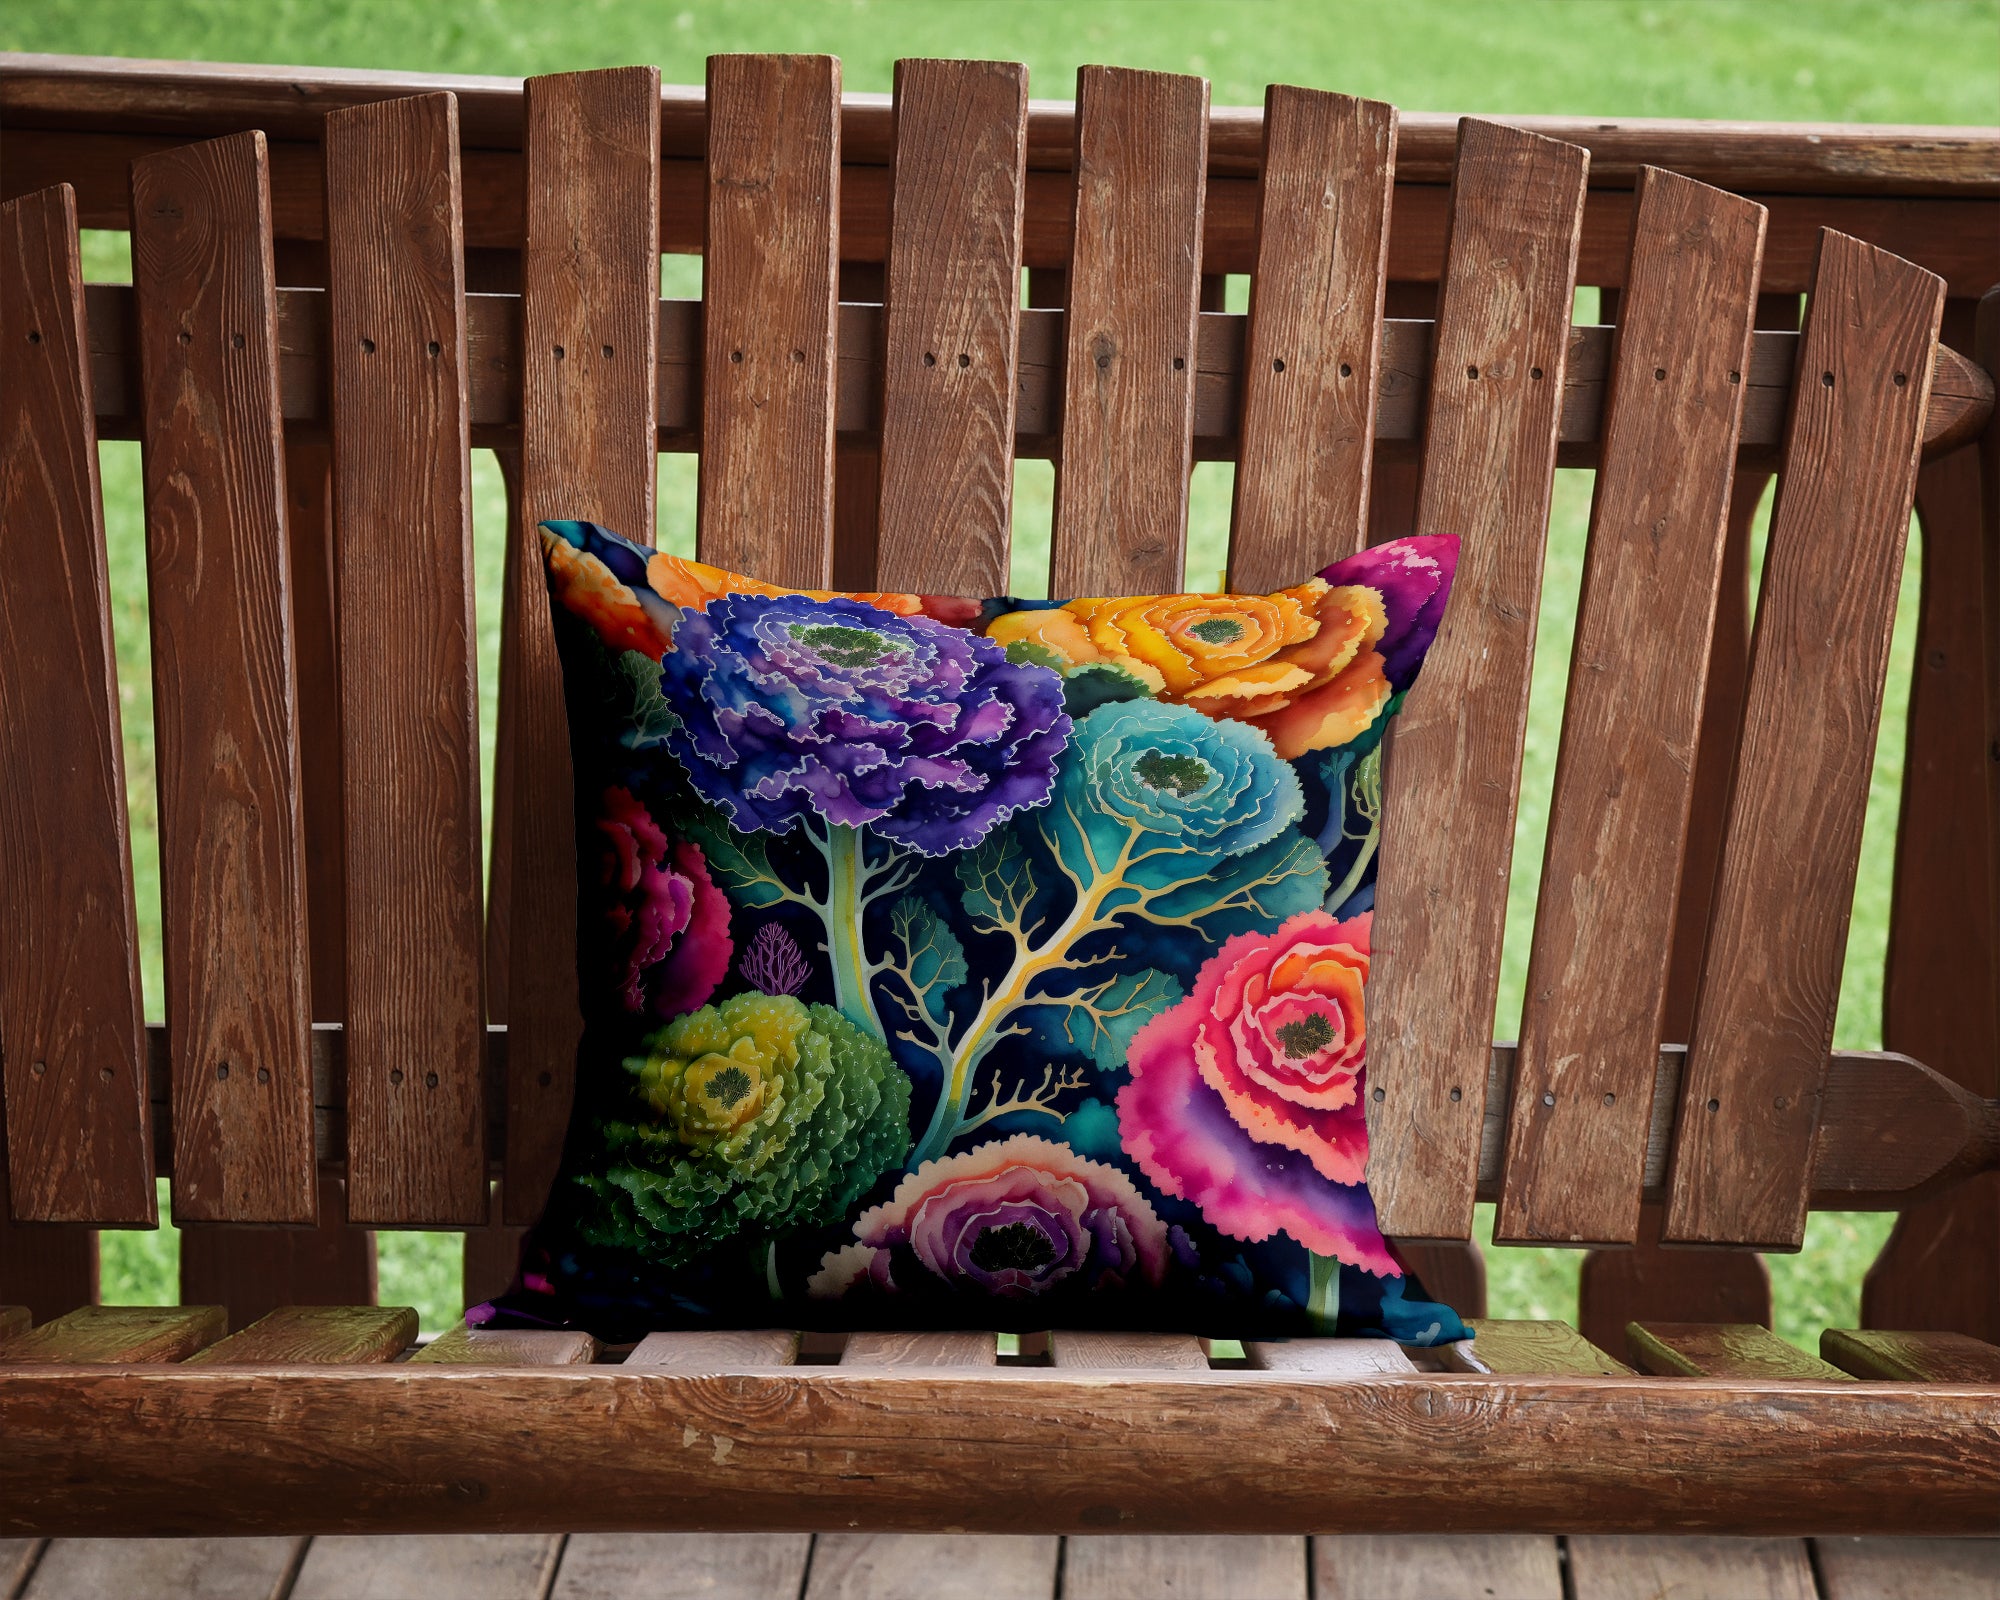 Buy this Colorful Ornamental Kale Fabric Decorative Pillow